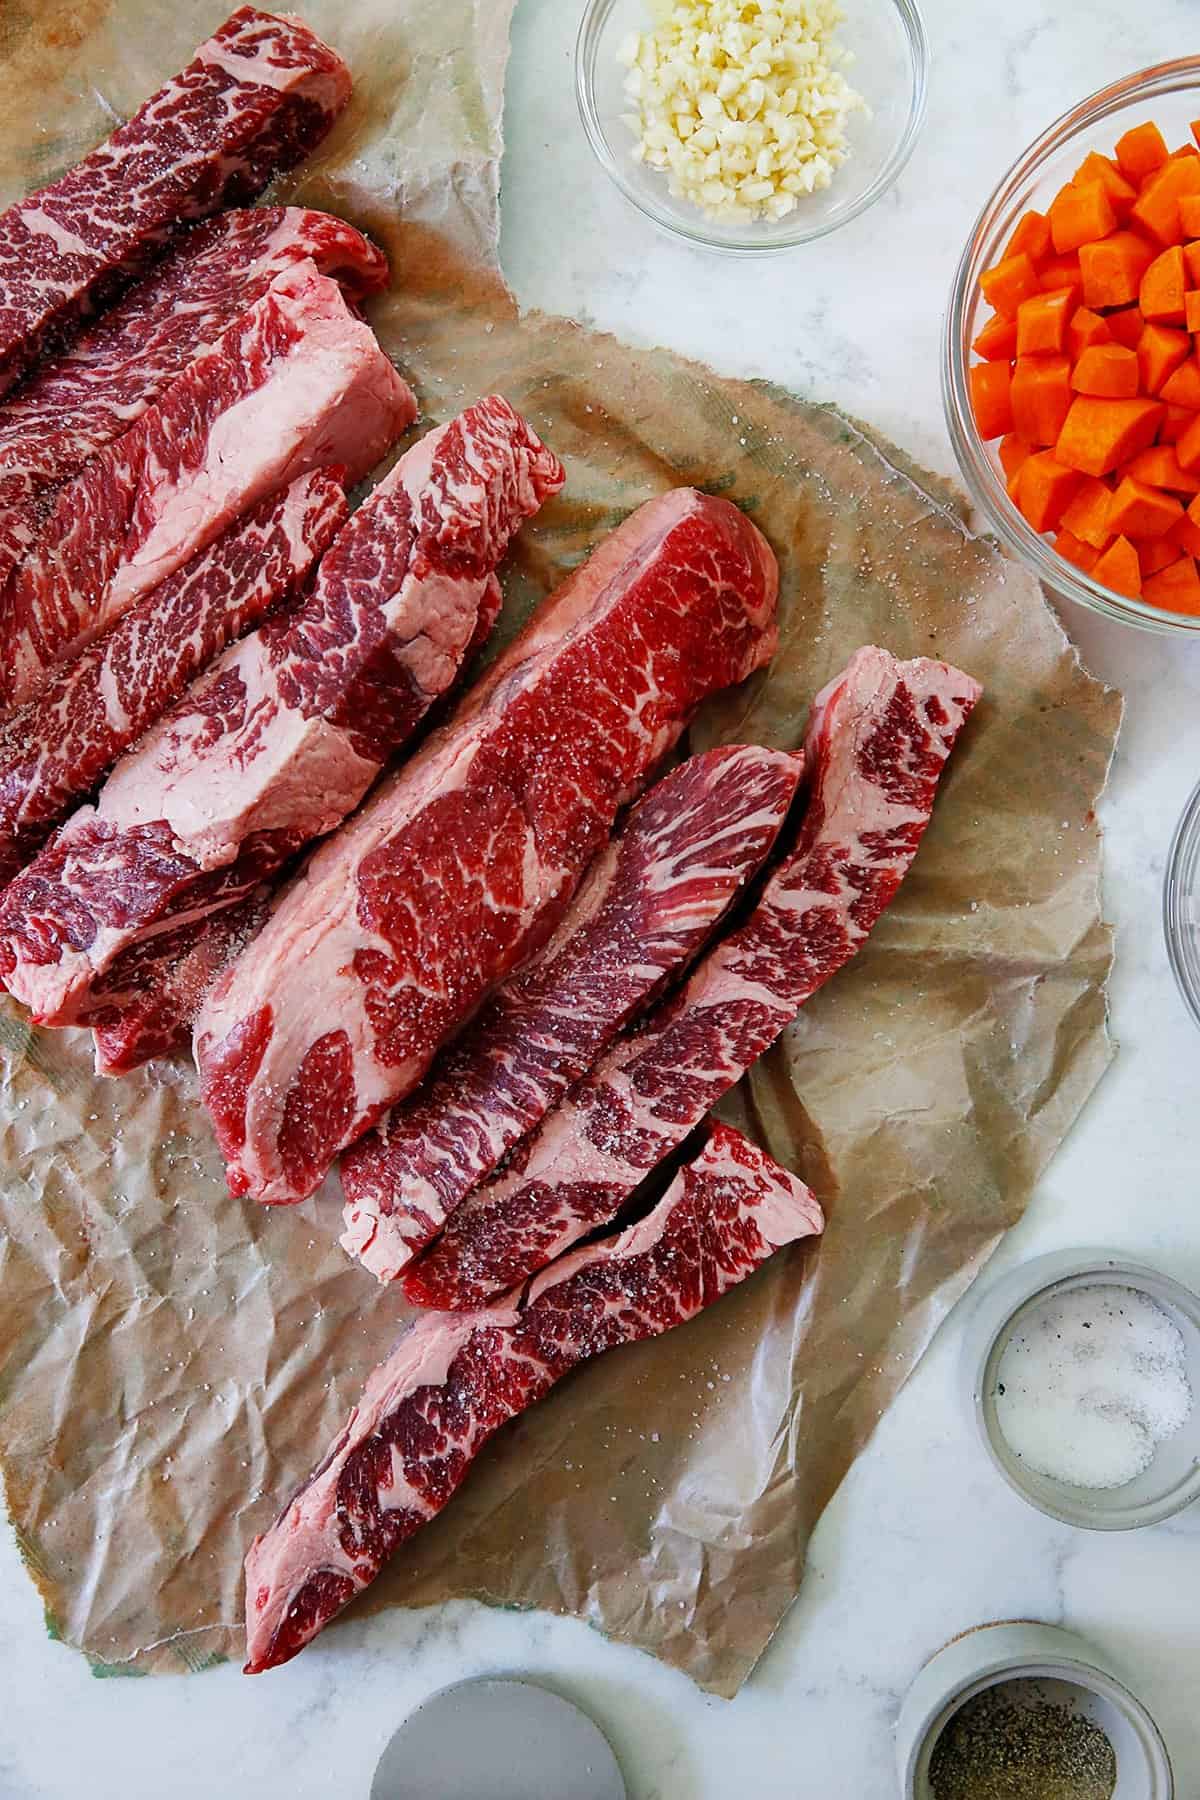 Ingredients for Beef Short Ribs in the Instant Pot